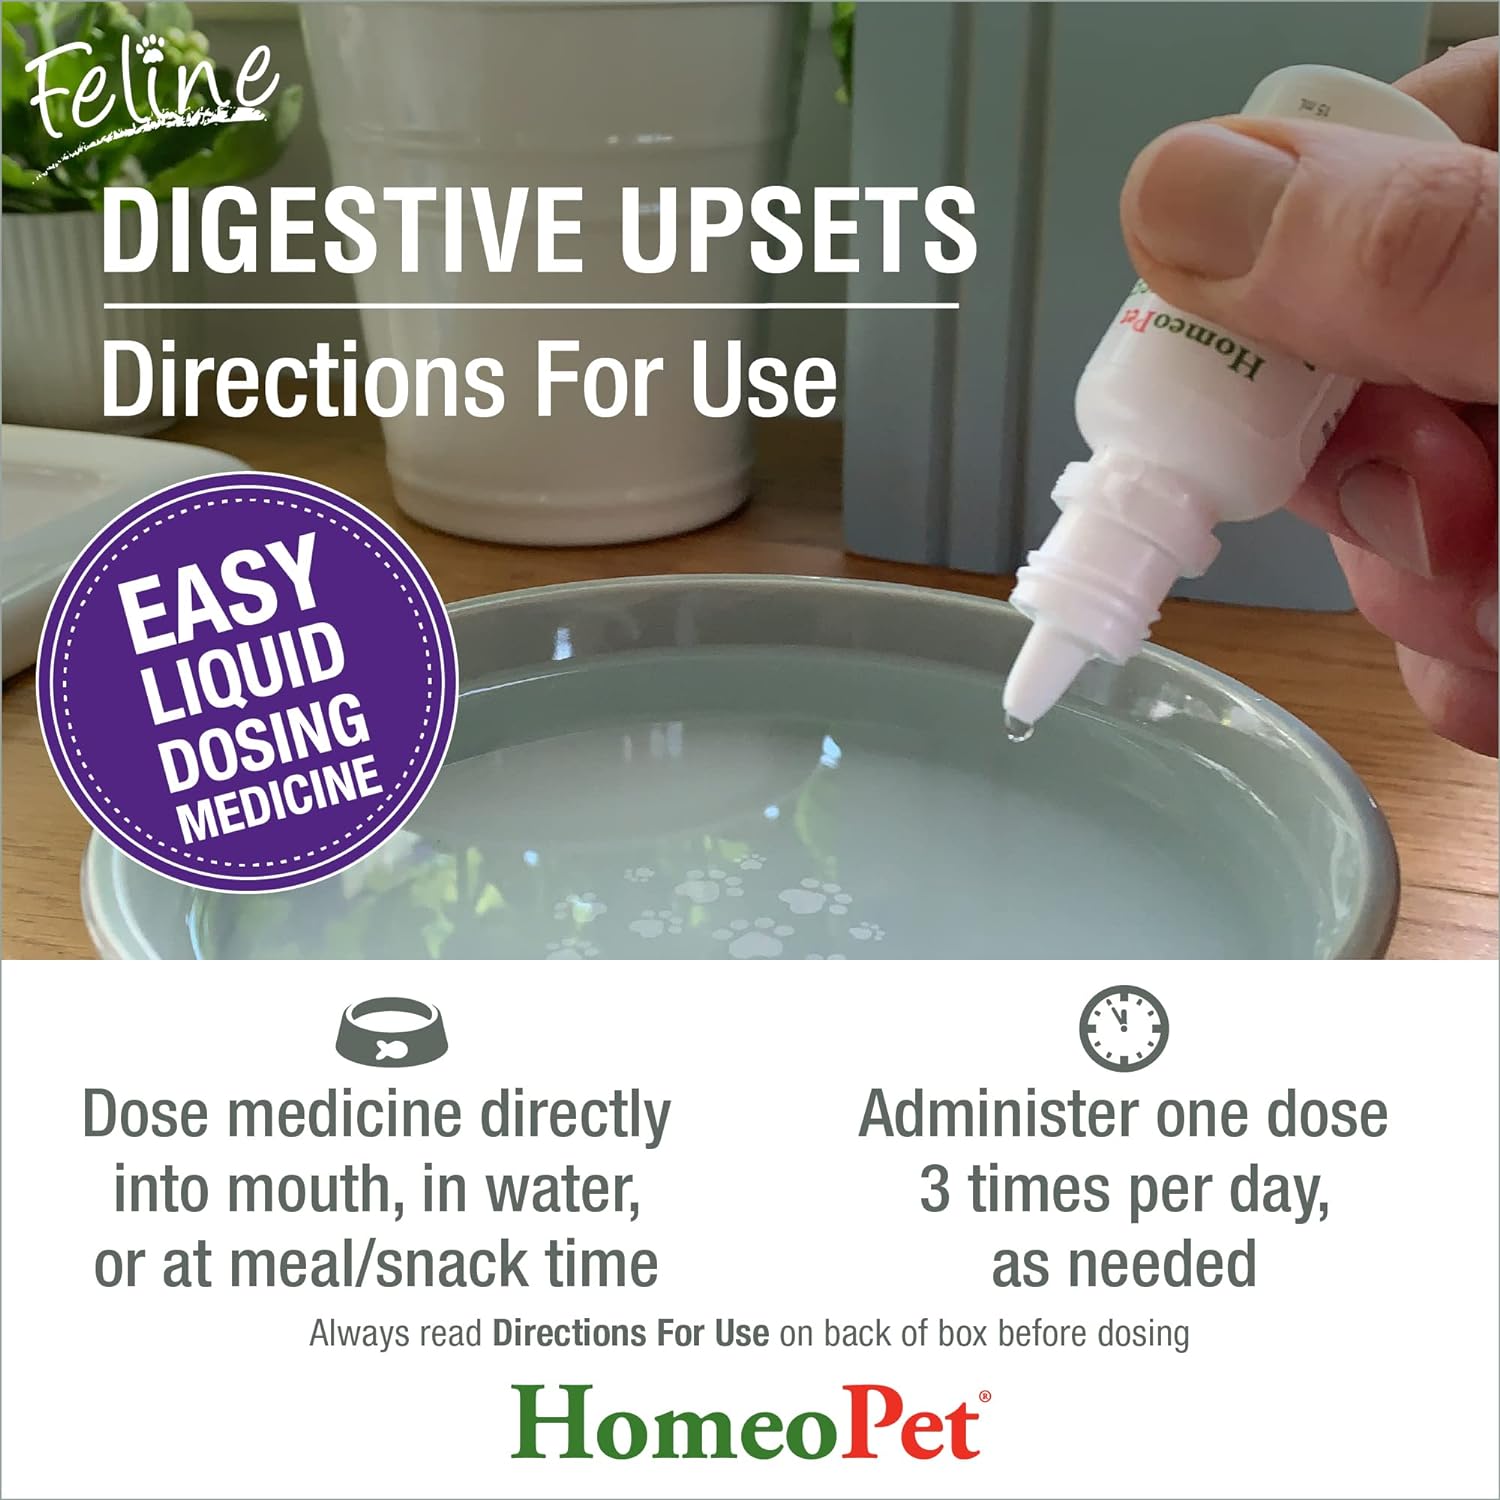 HomeoPet Feline Digestive Upsets, Natural Pet Digestive Support for Cats and Kittens, Safe and Natural Cat or Dog Medicine, 15 Milliliters : Pet Digestive Remedies : Pet Supplies